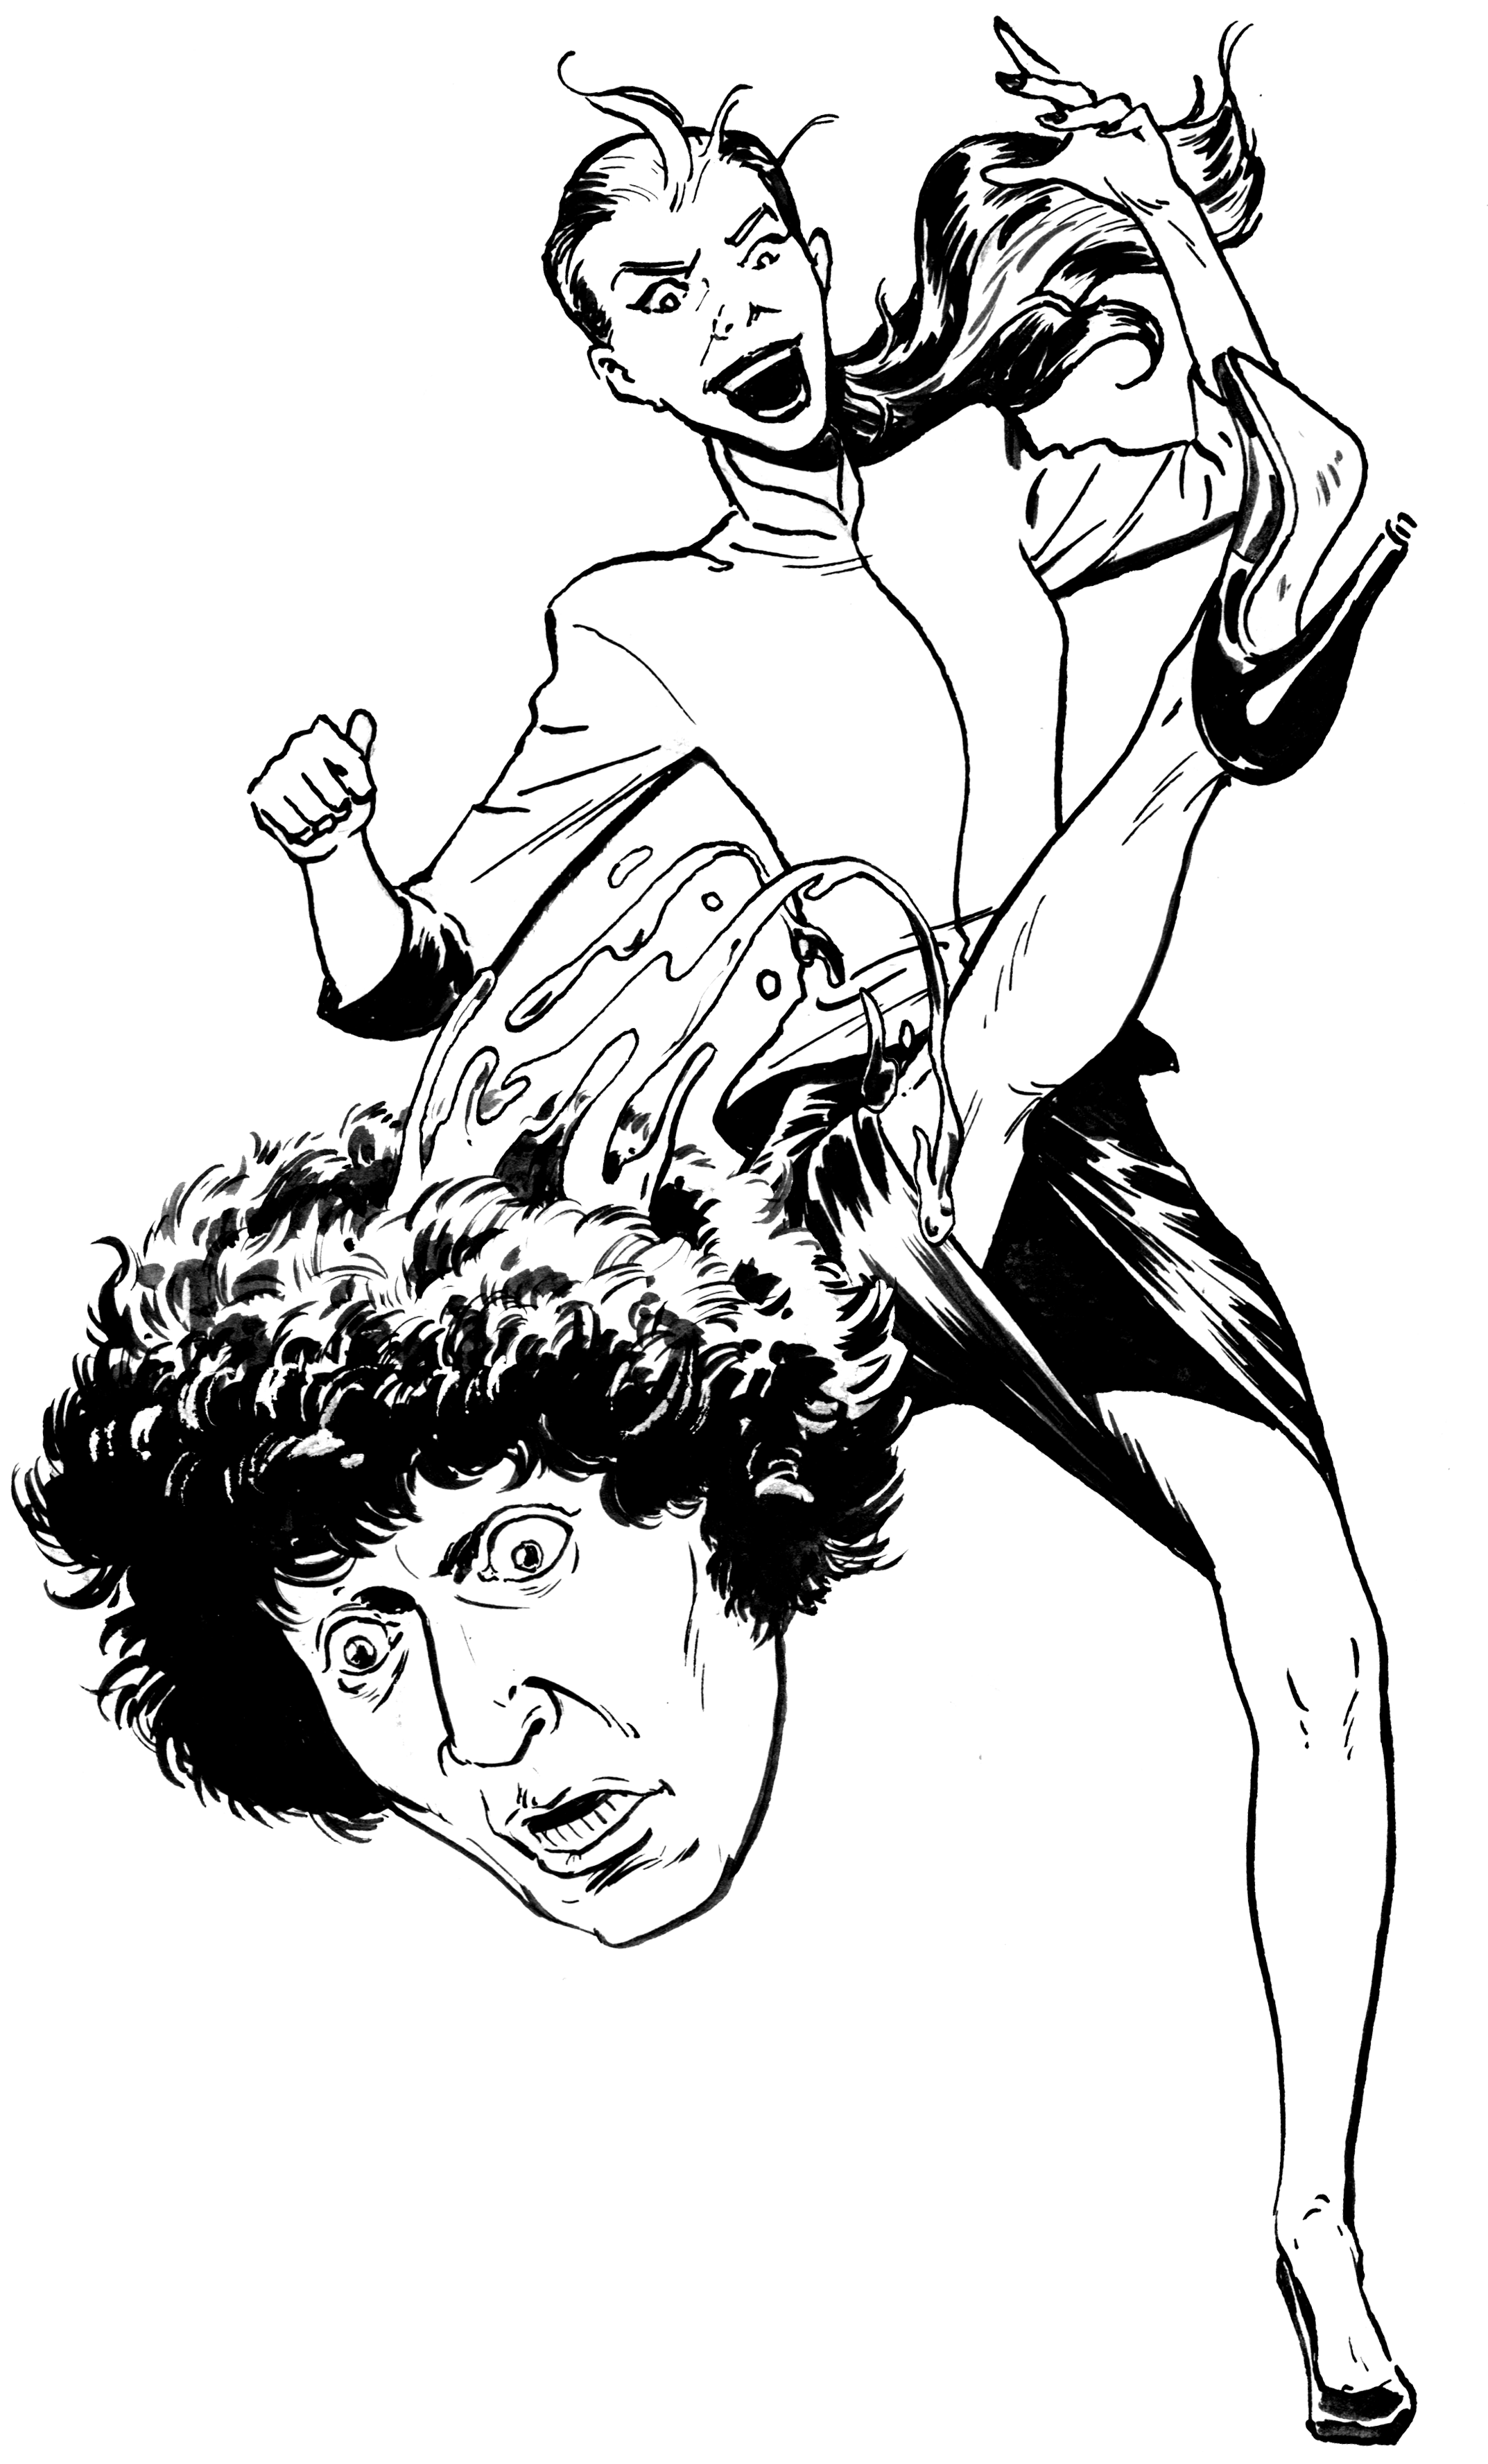 Delgada kicking the decapitated Fourth Doctor's head like a soccer ball